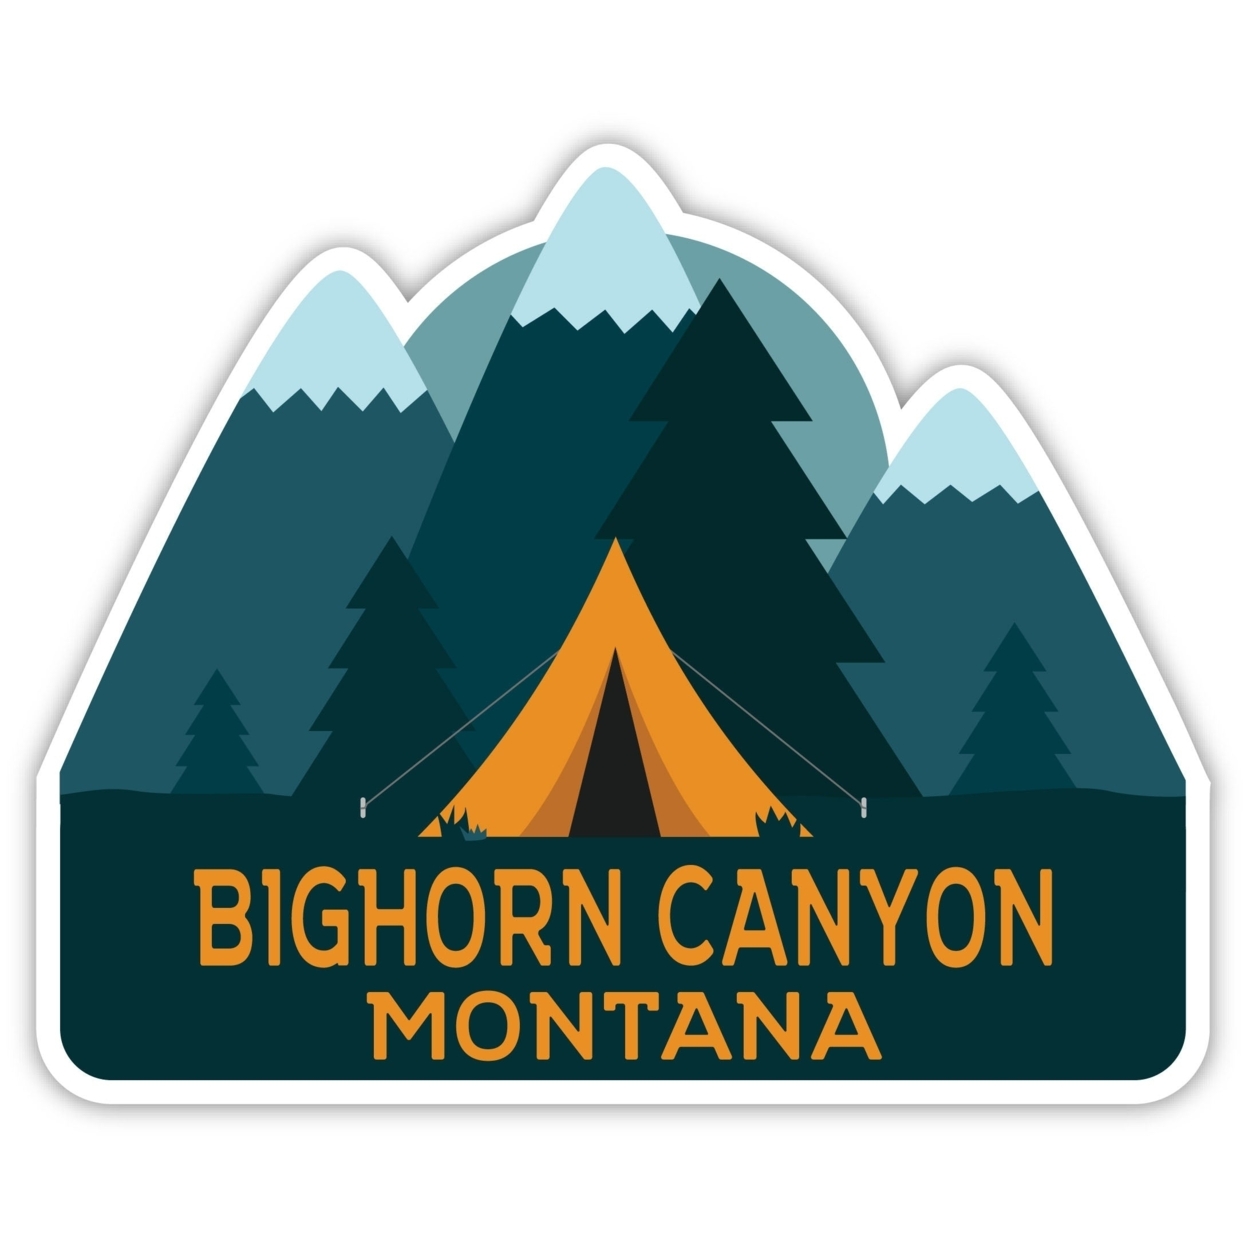 Bighorn Canyon Montana Souvenir Decorative Stickers (Choose Theme And Size) - 4-Pack, 12-Inch, Tent